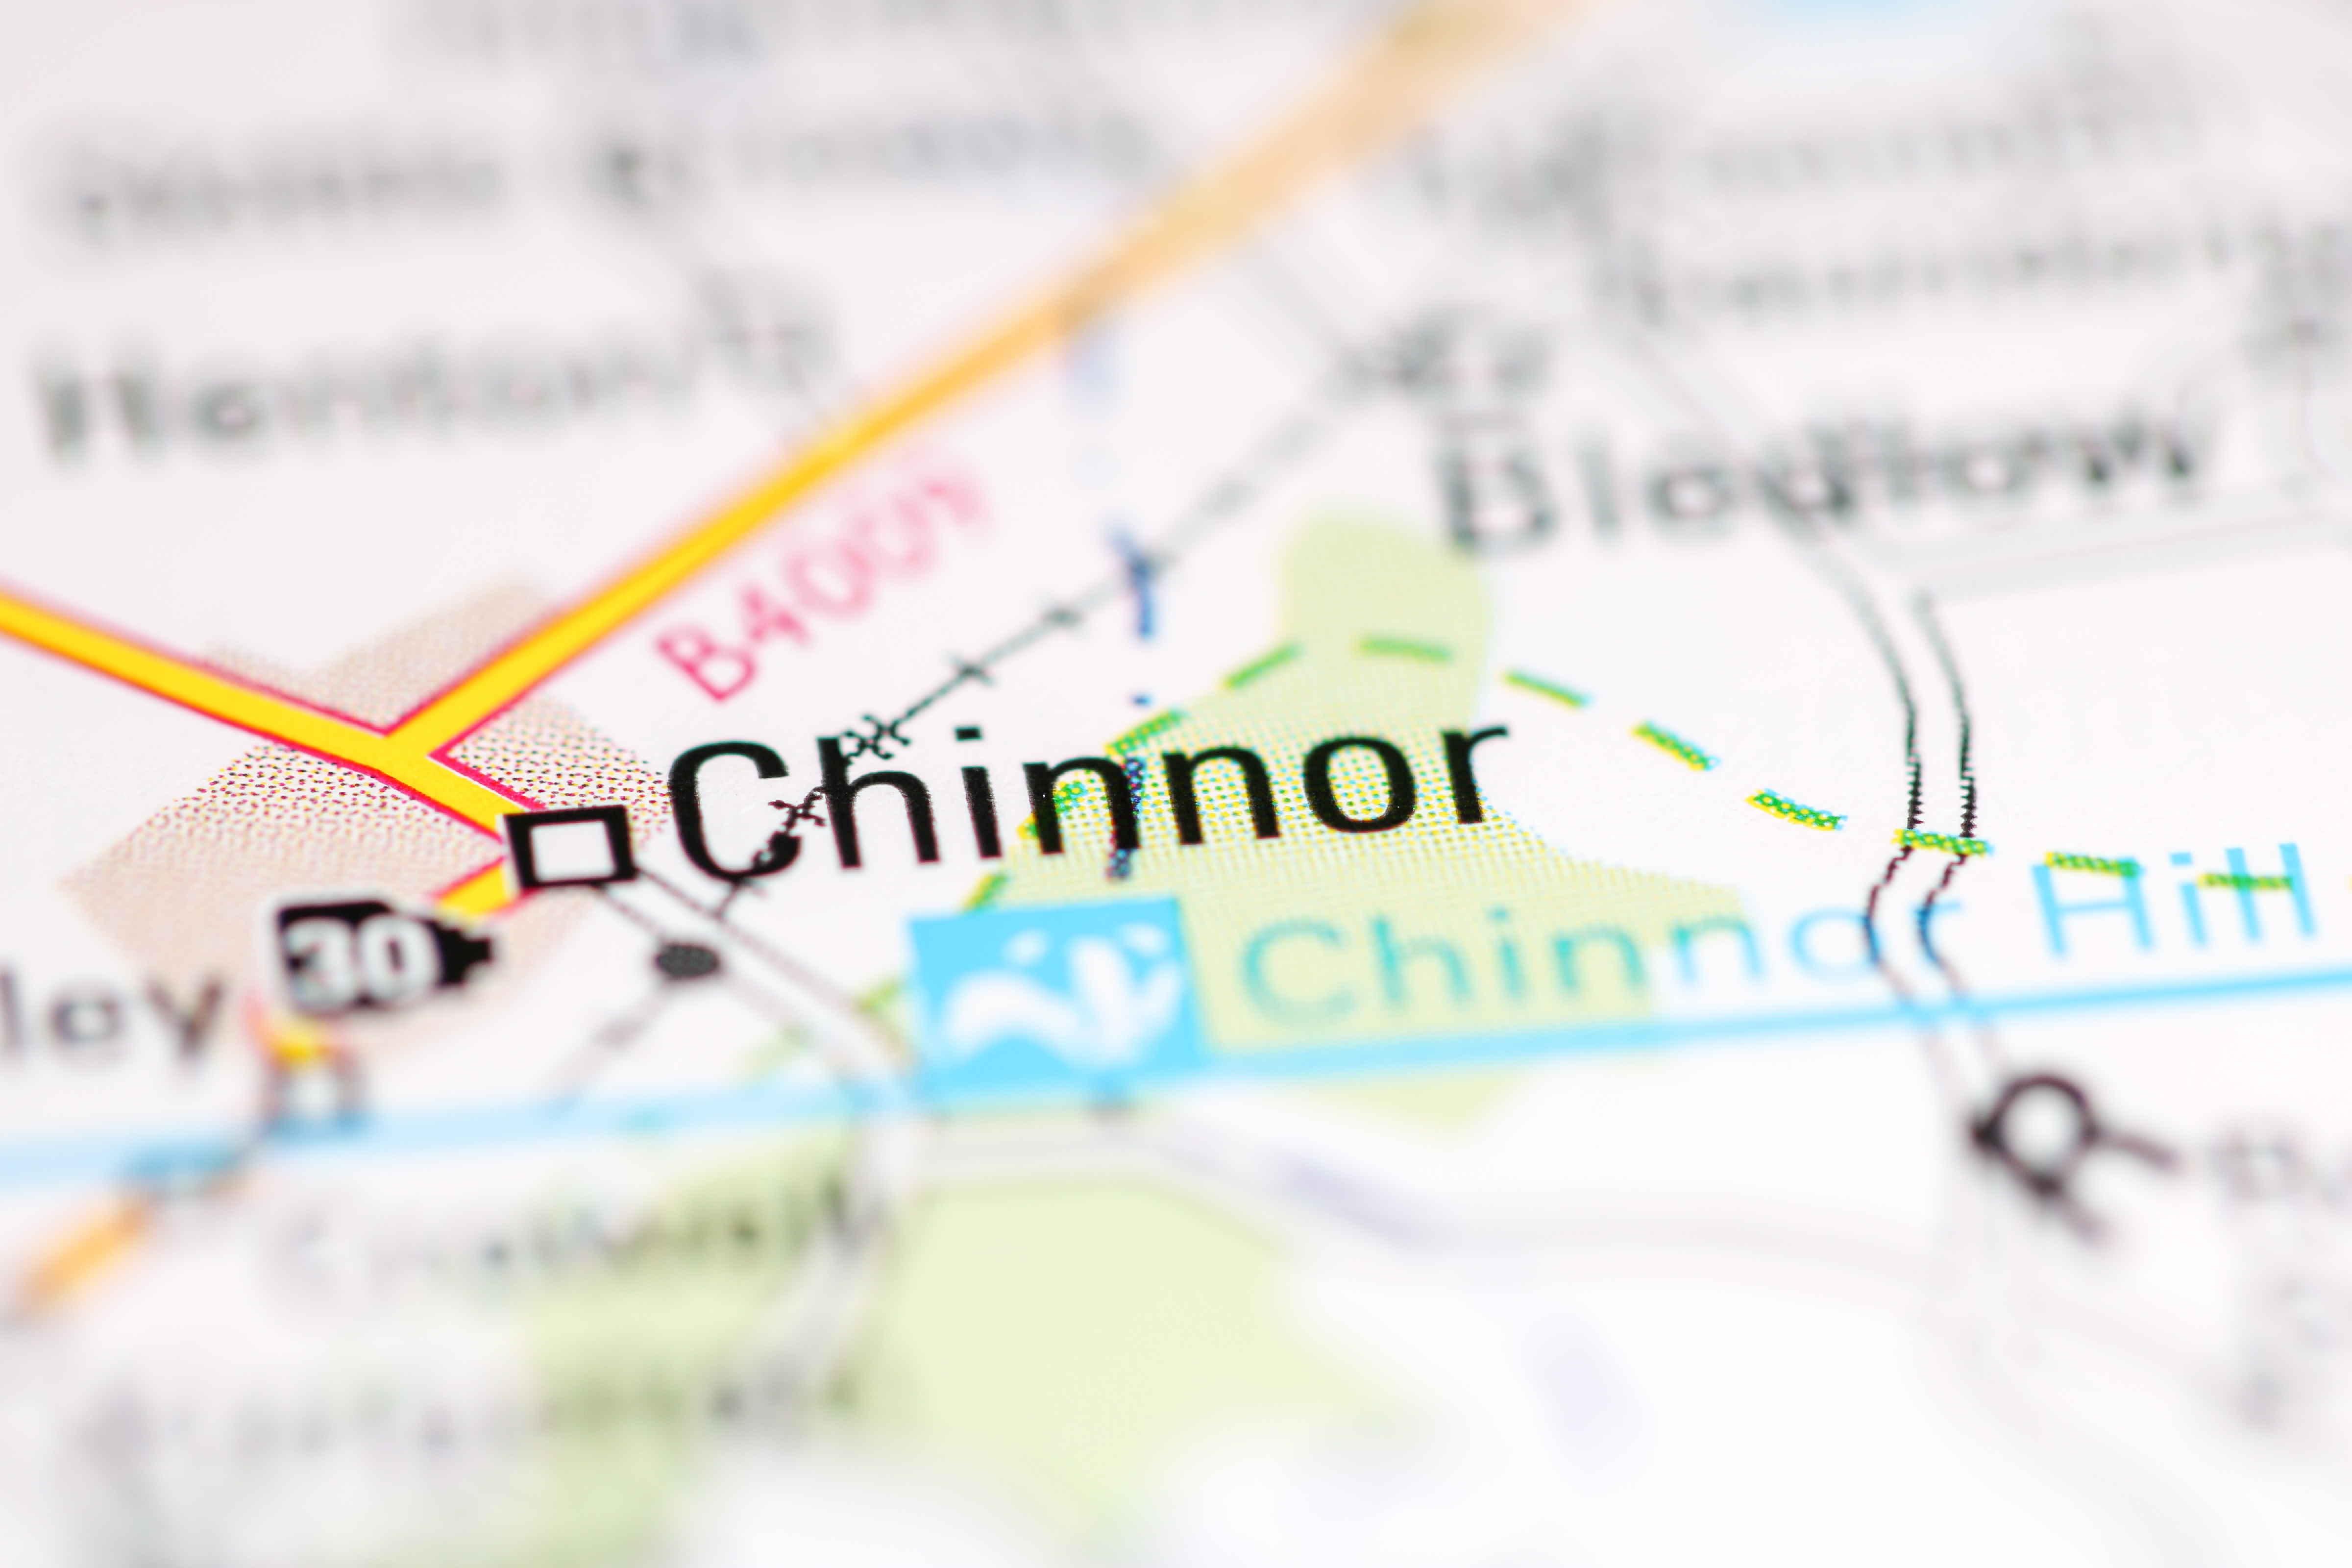 Chinnor: Your ultimate area guide